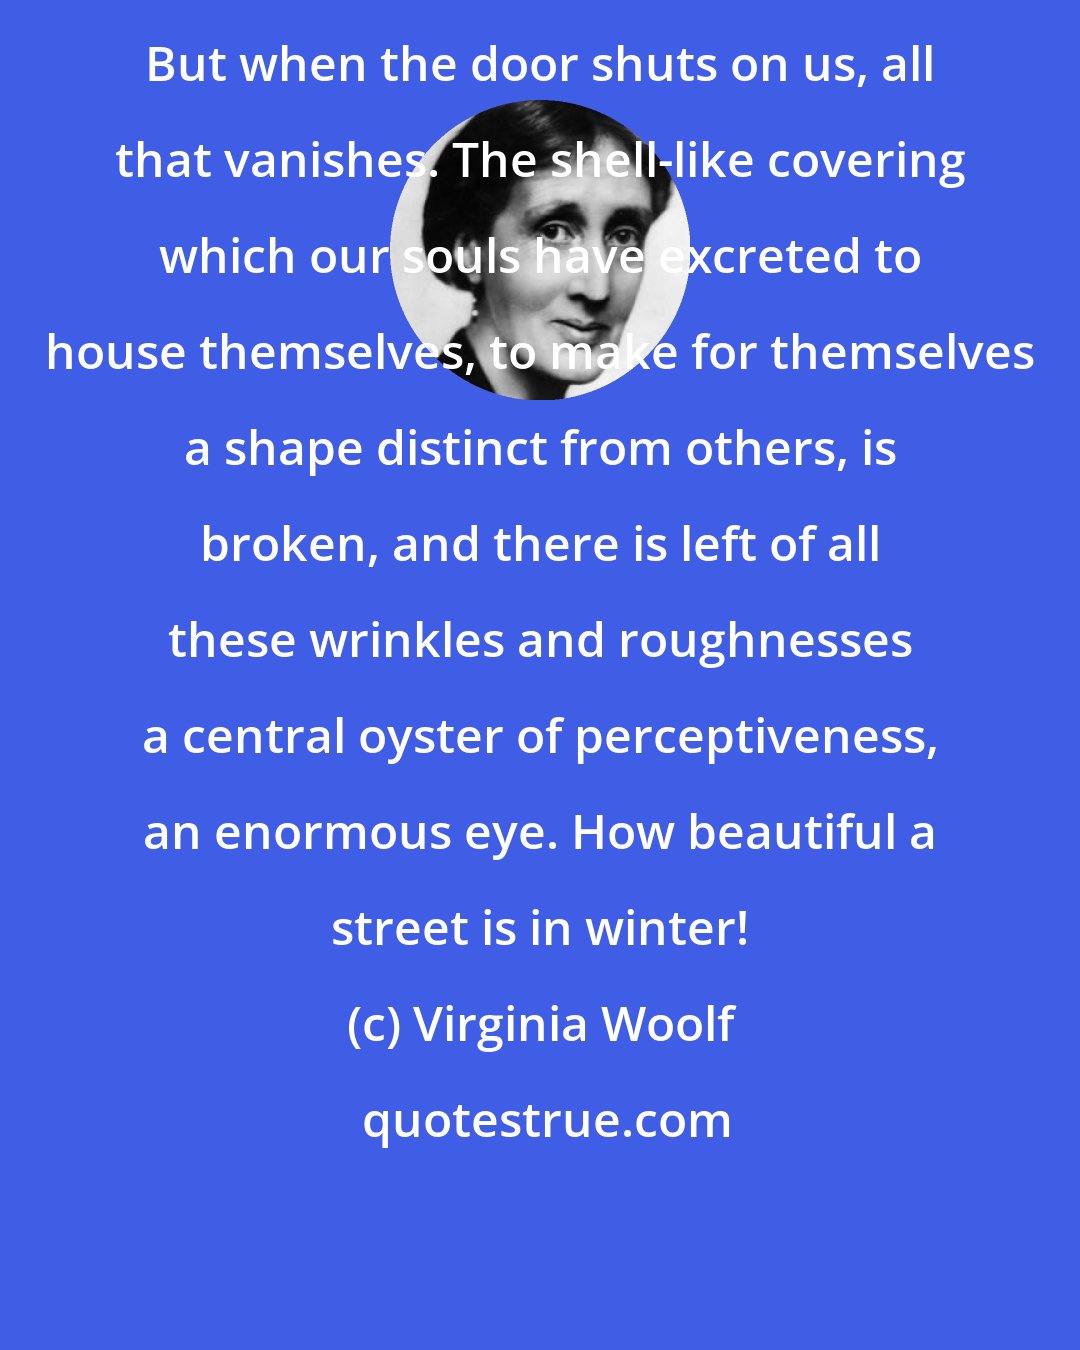 Virginia Woolf: But when the door shuts on us, all that vanishes. The shell-like covering which our souls have excreted to house themselves, to make for themselves a shape distinct from others, is broken, and there is left of all these wrinkles and roughnesses a central oyster of perceptiveness, an enormous eye. How beautiful a street is in winter!